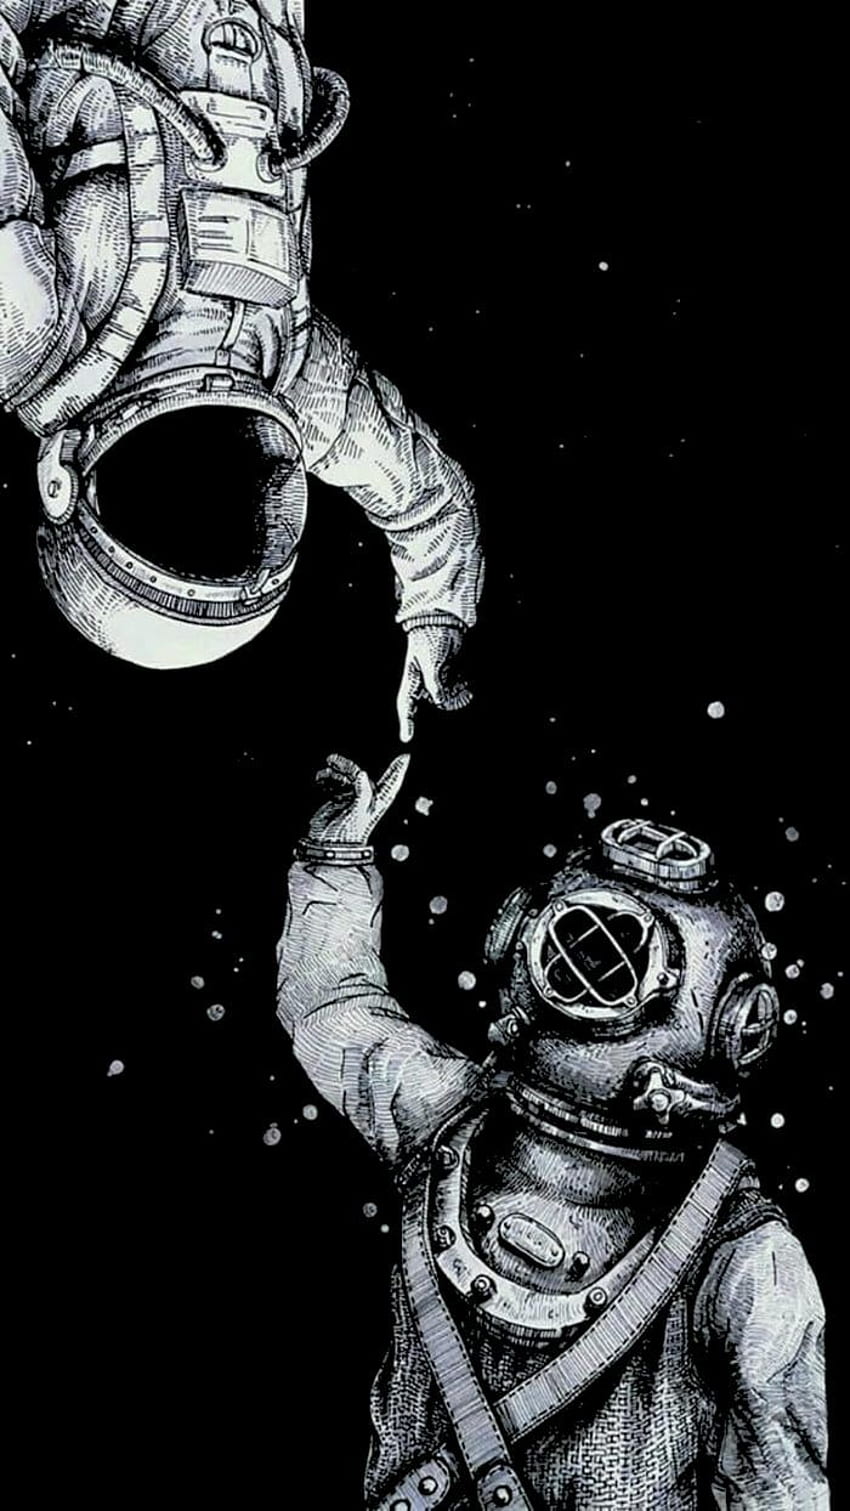 Let's go see the Moon 🌔” Astronaut eaJ pencil drawing : r/EajParkOfficial